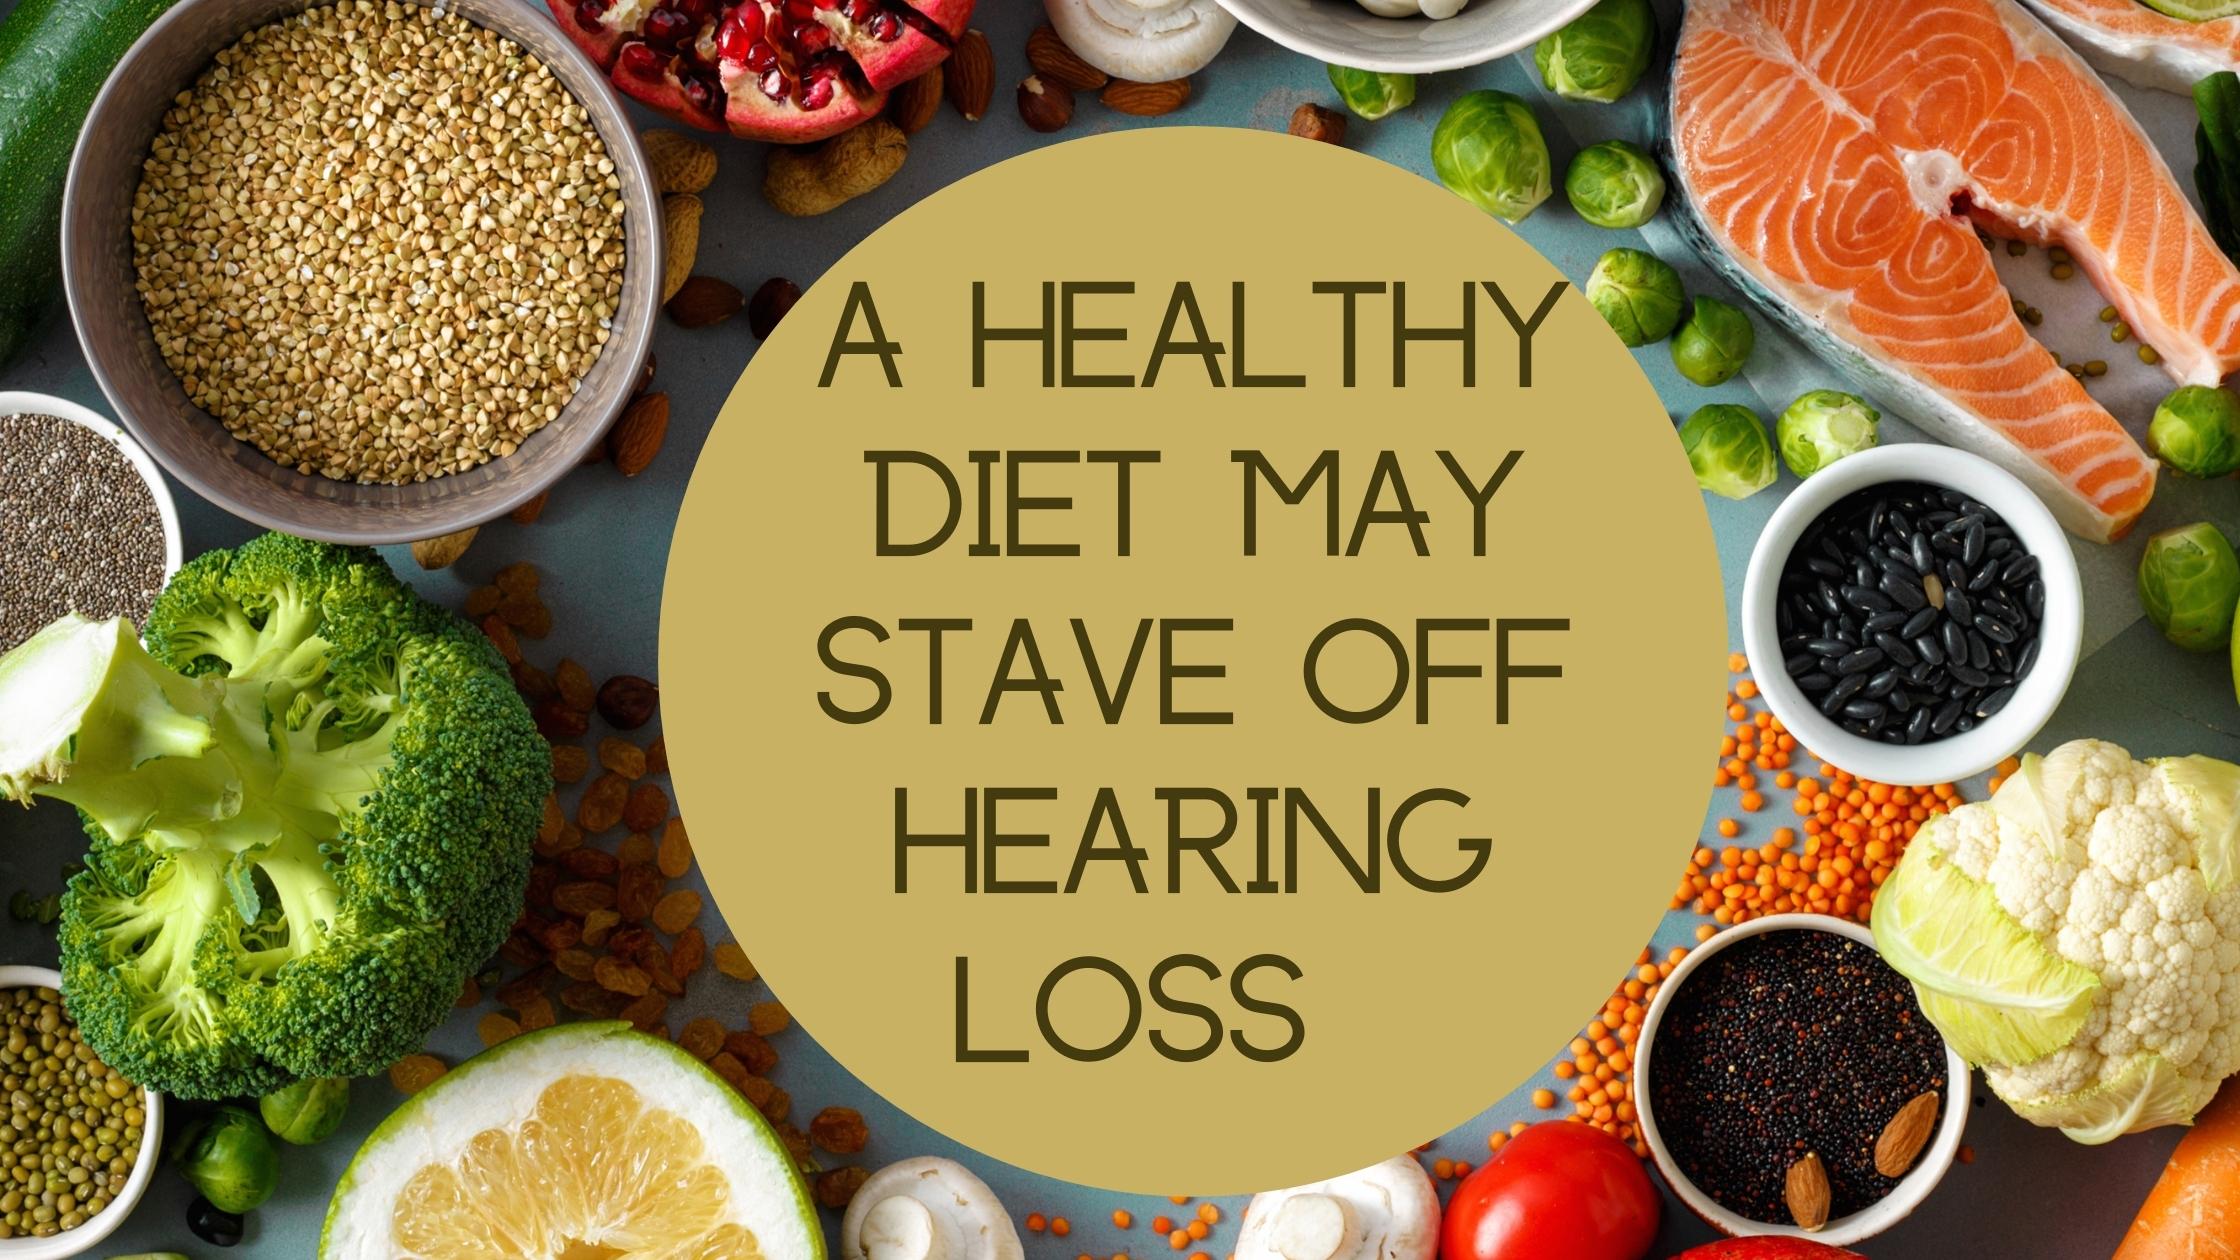 A Healthy Diet May Stave Off Hearing Loss